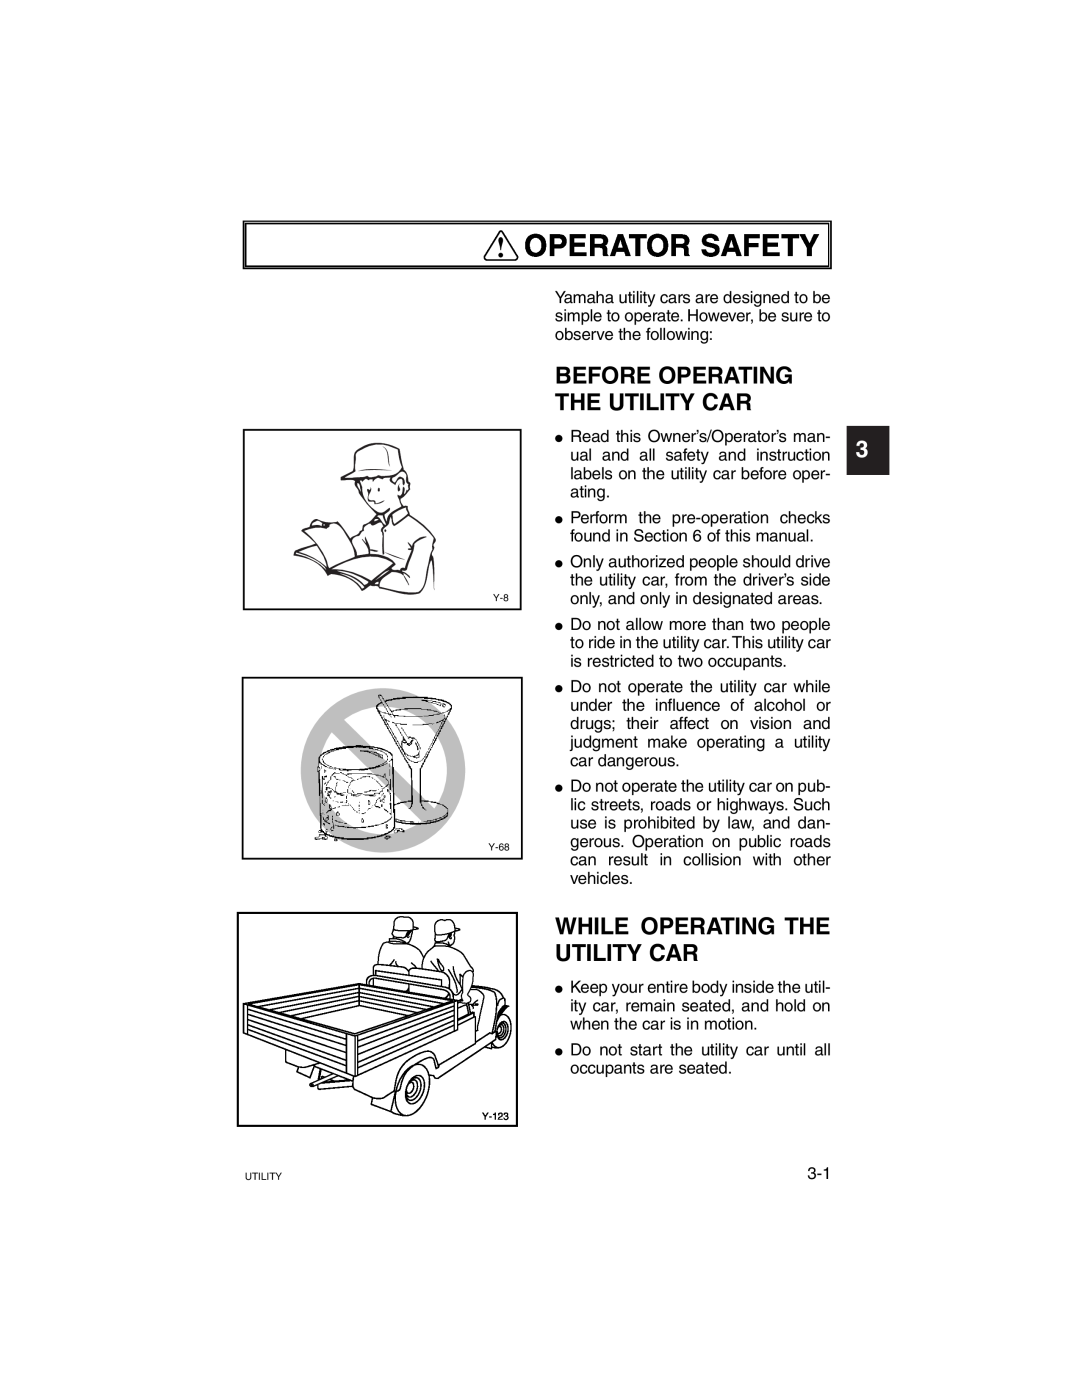 Yamaha G21A manual Operator Safety, Before Operating The Utility Car, While Operating The 